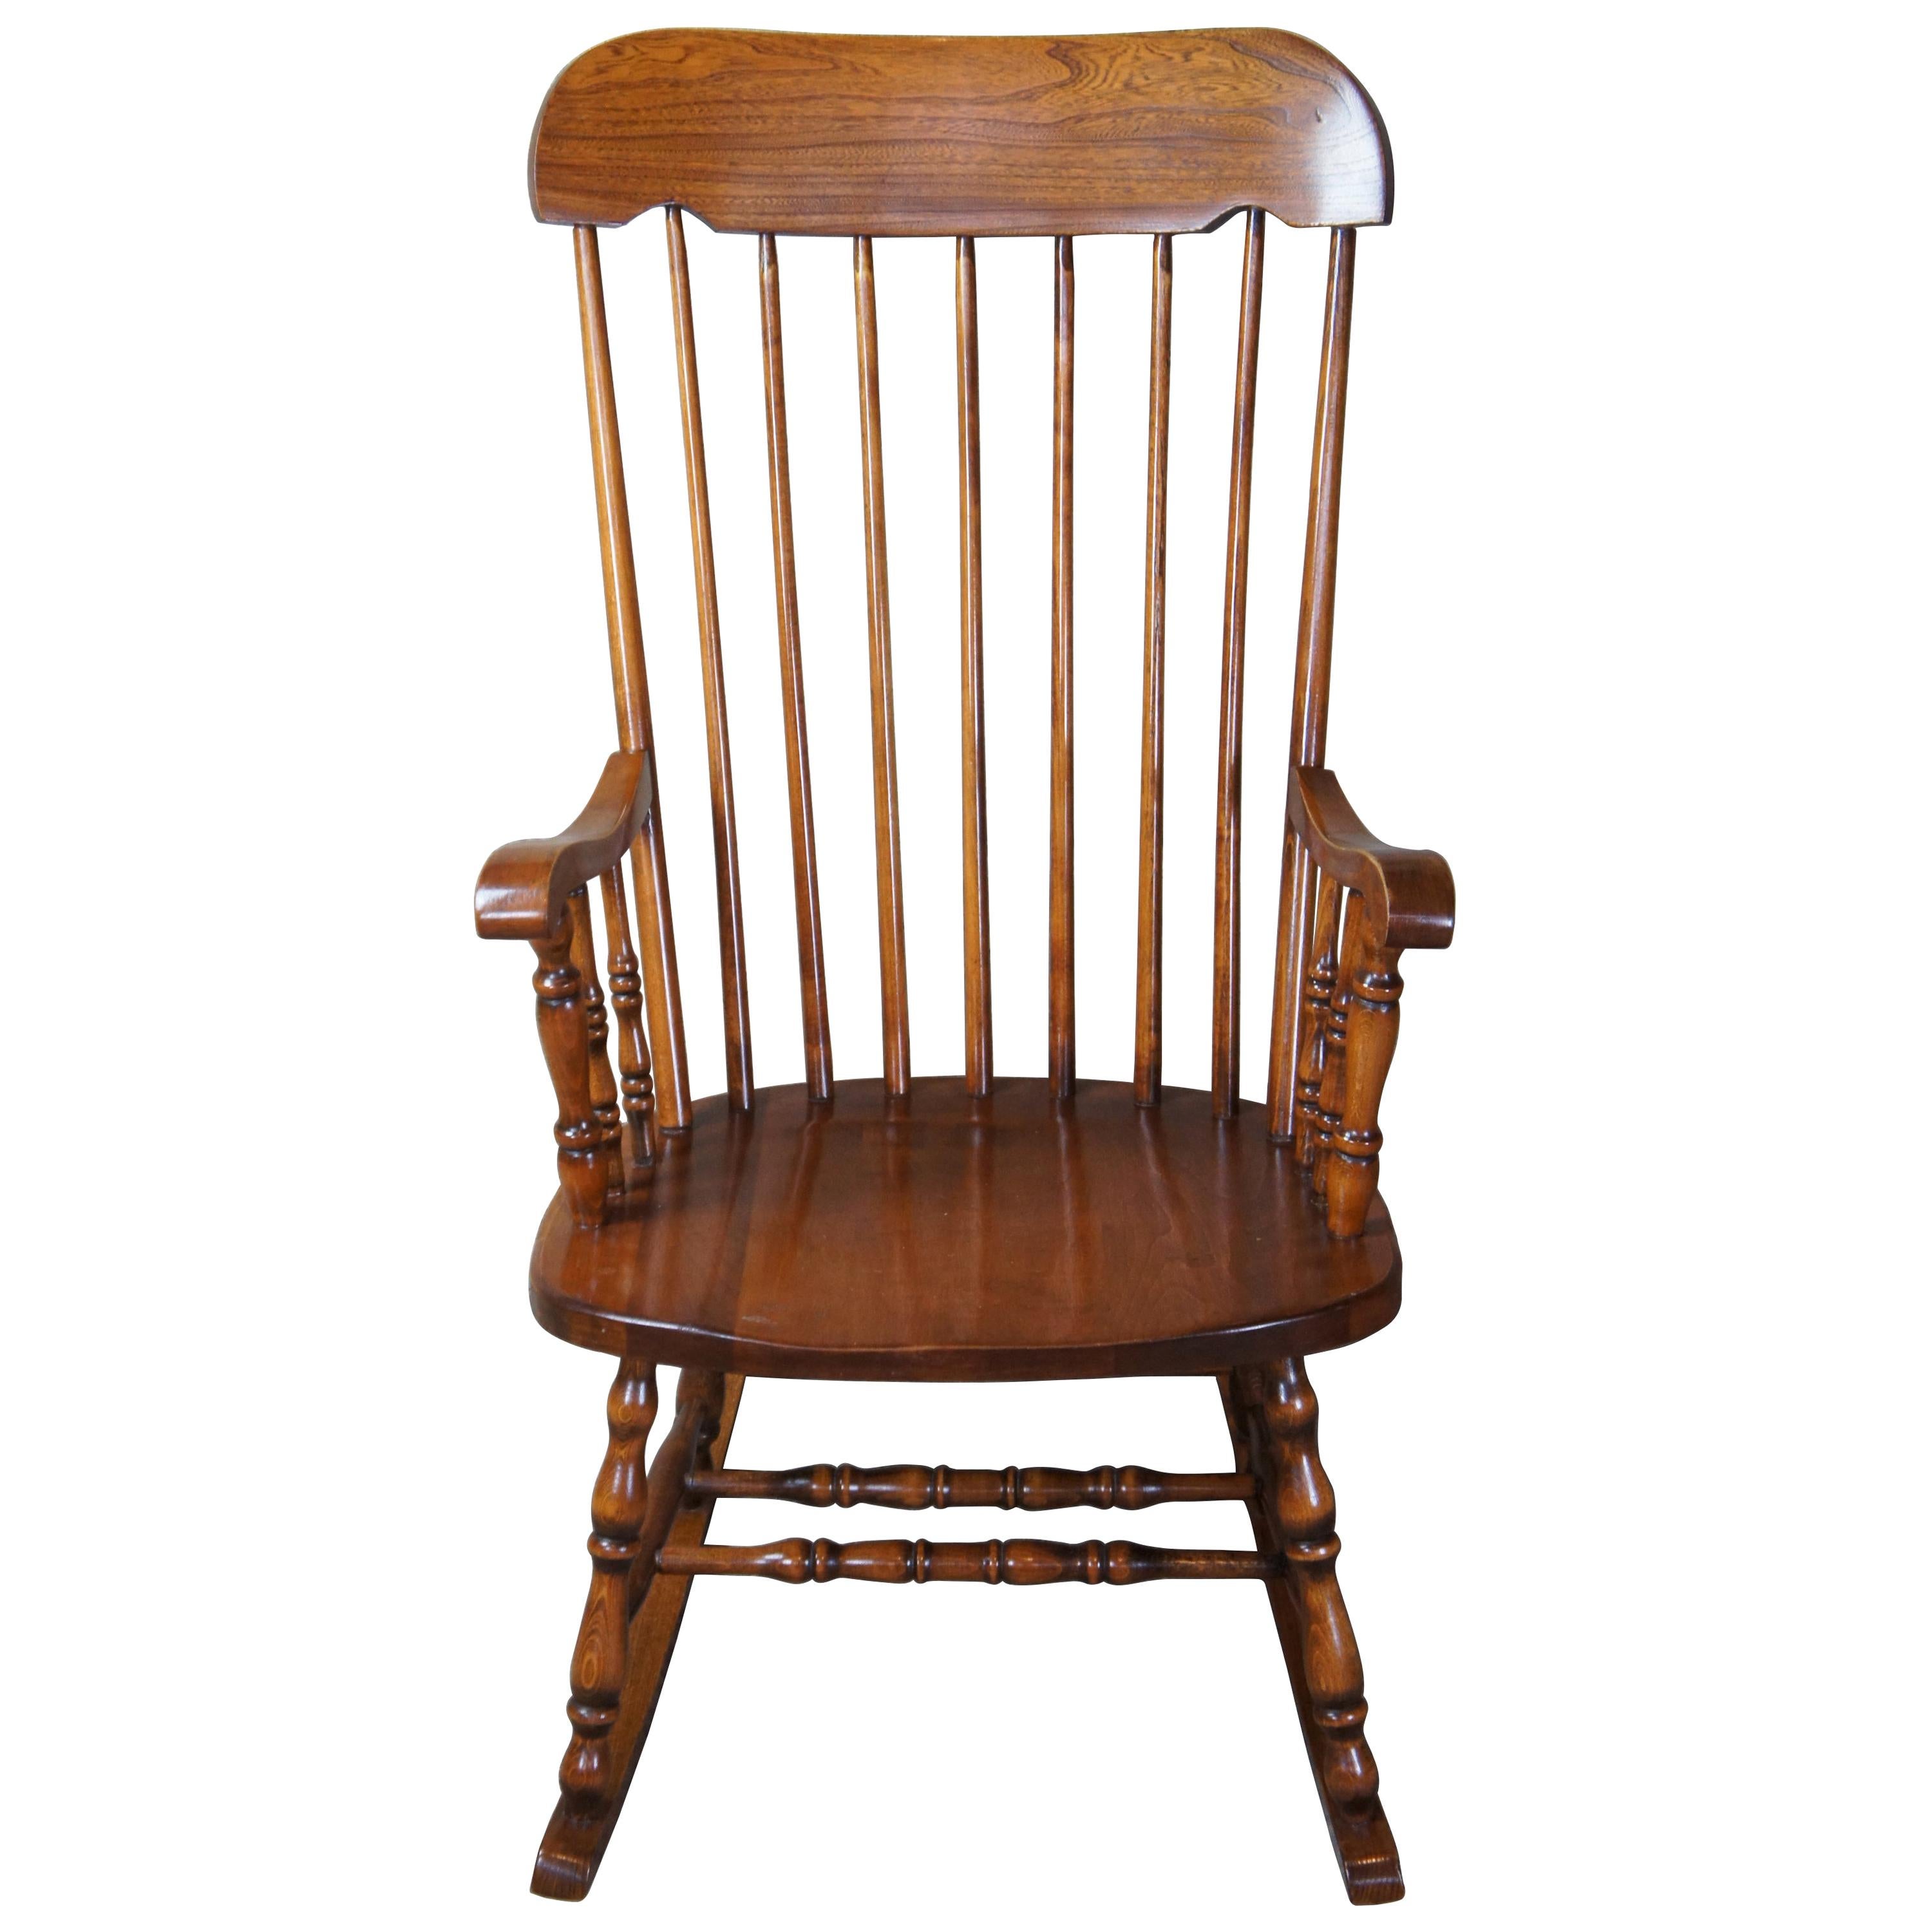 Early American Country Maple Spindle Rocking Chair Farmhouse Rocker Windsor